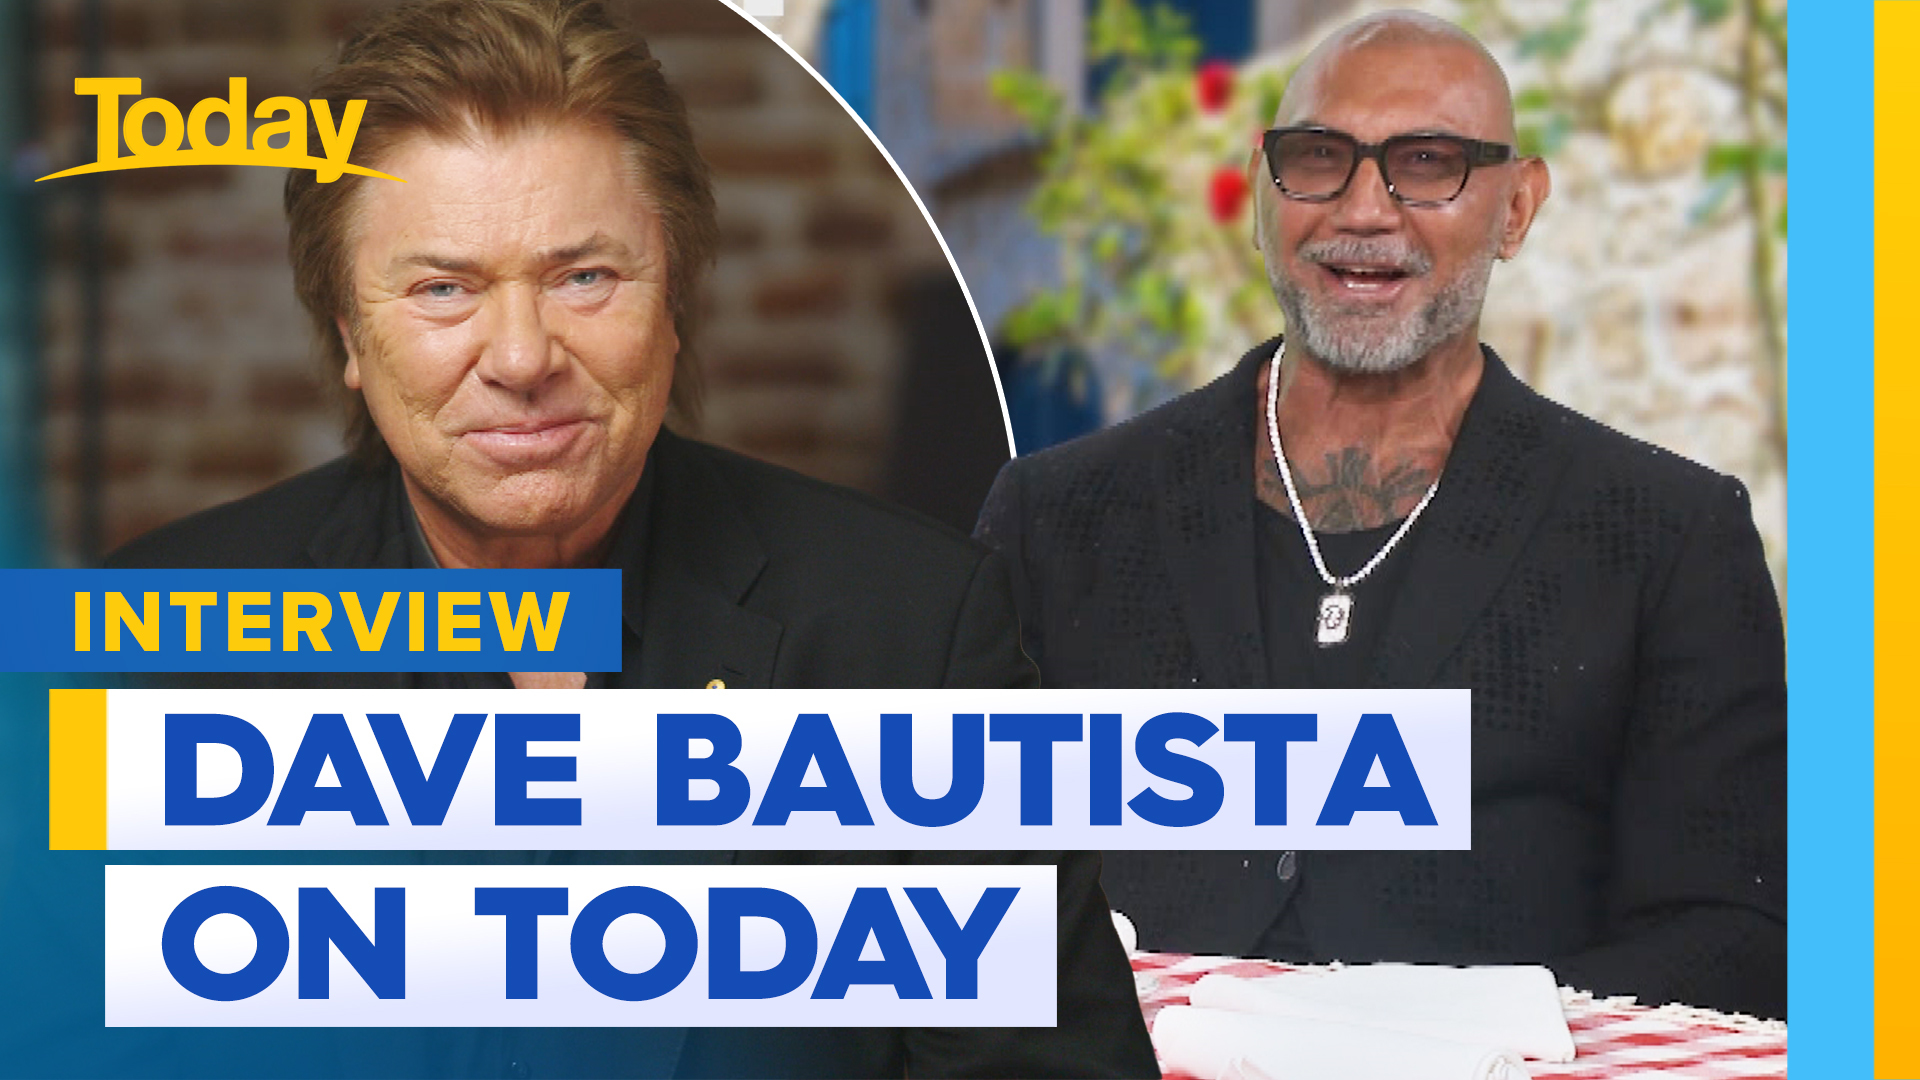 Dave Bautista catches up with Today